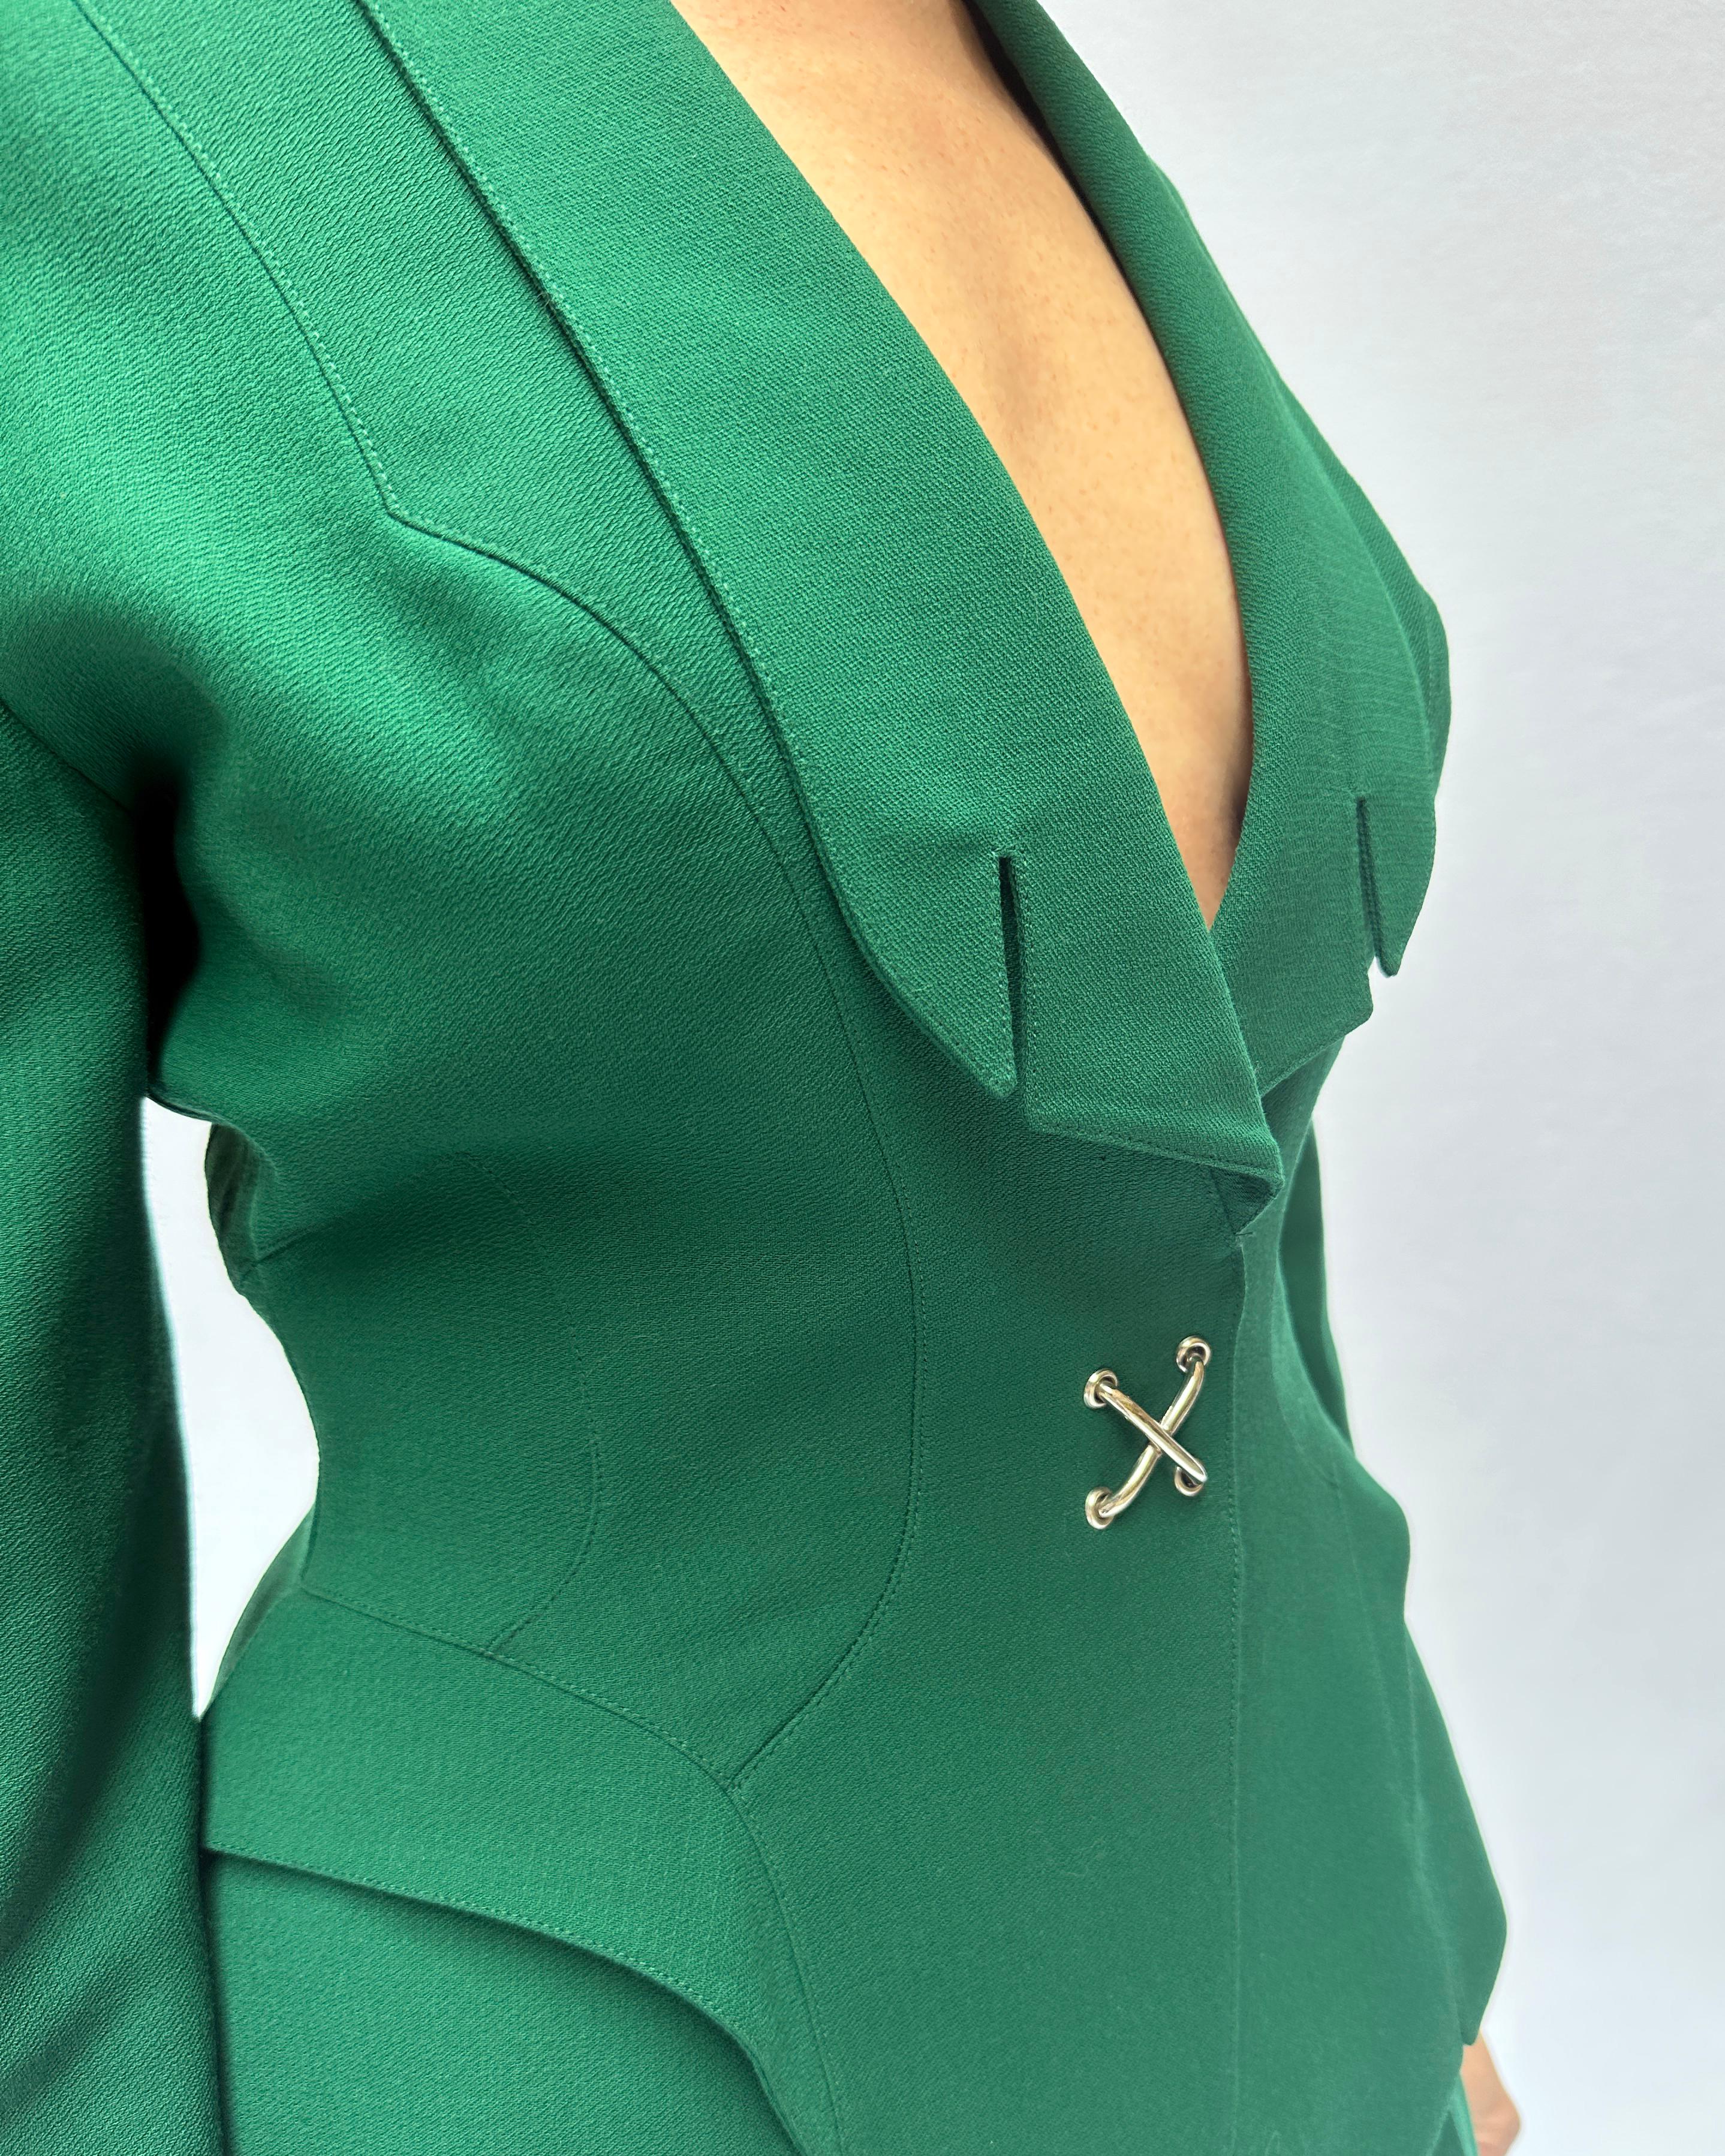 Vintage Thierry Mugler Fall 1992 Emerald Jacket + Pleated Skirt Suit For Sale 1